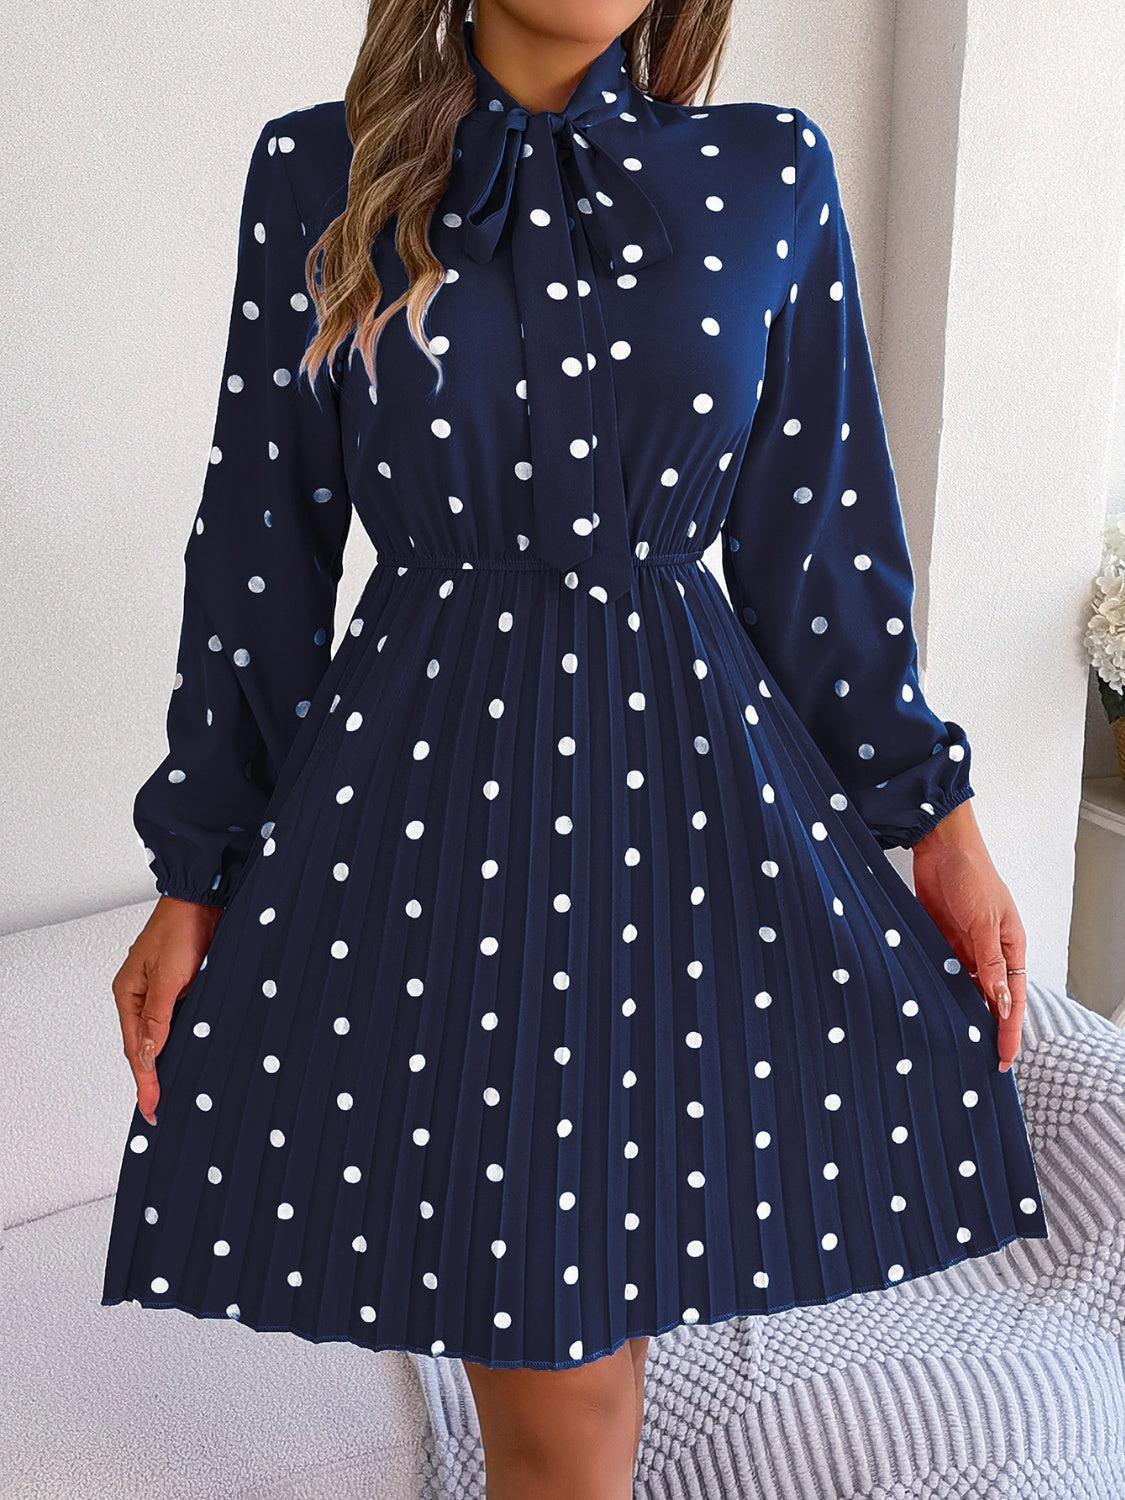 a woman wearing a blue dress with white polka dots